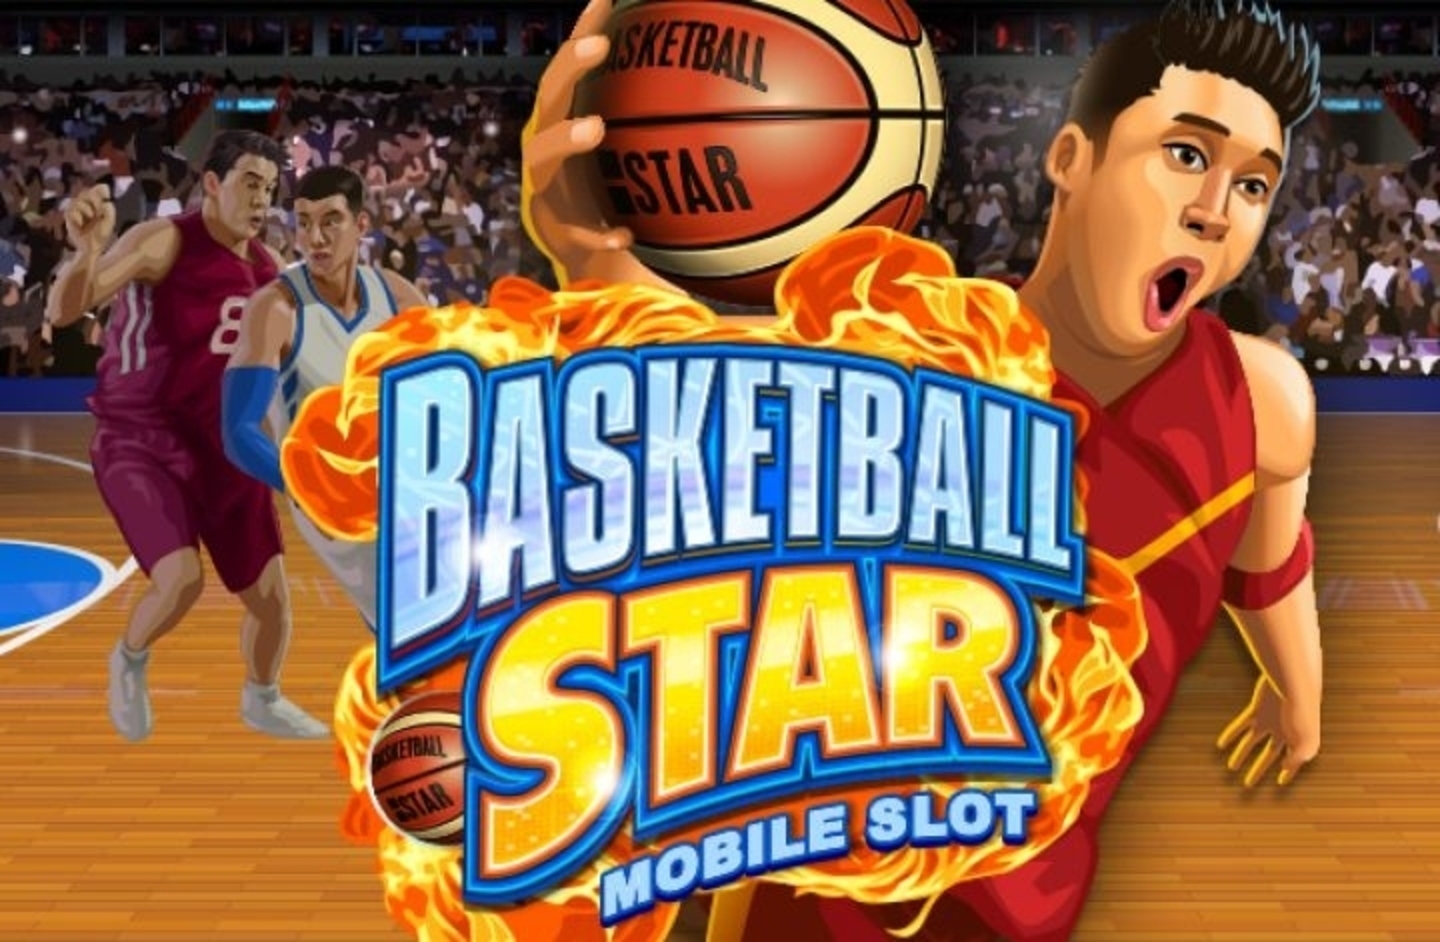 The Basketball Star Online Slot Demo Game by Microgaming